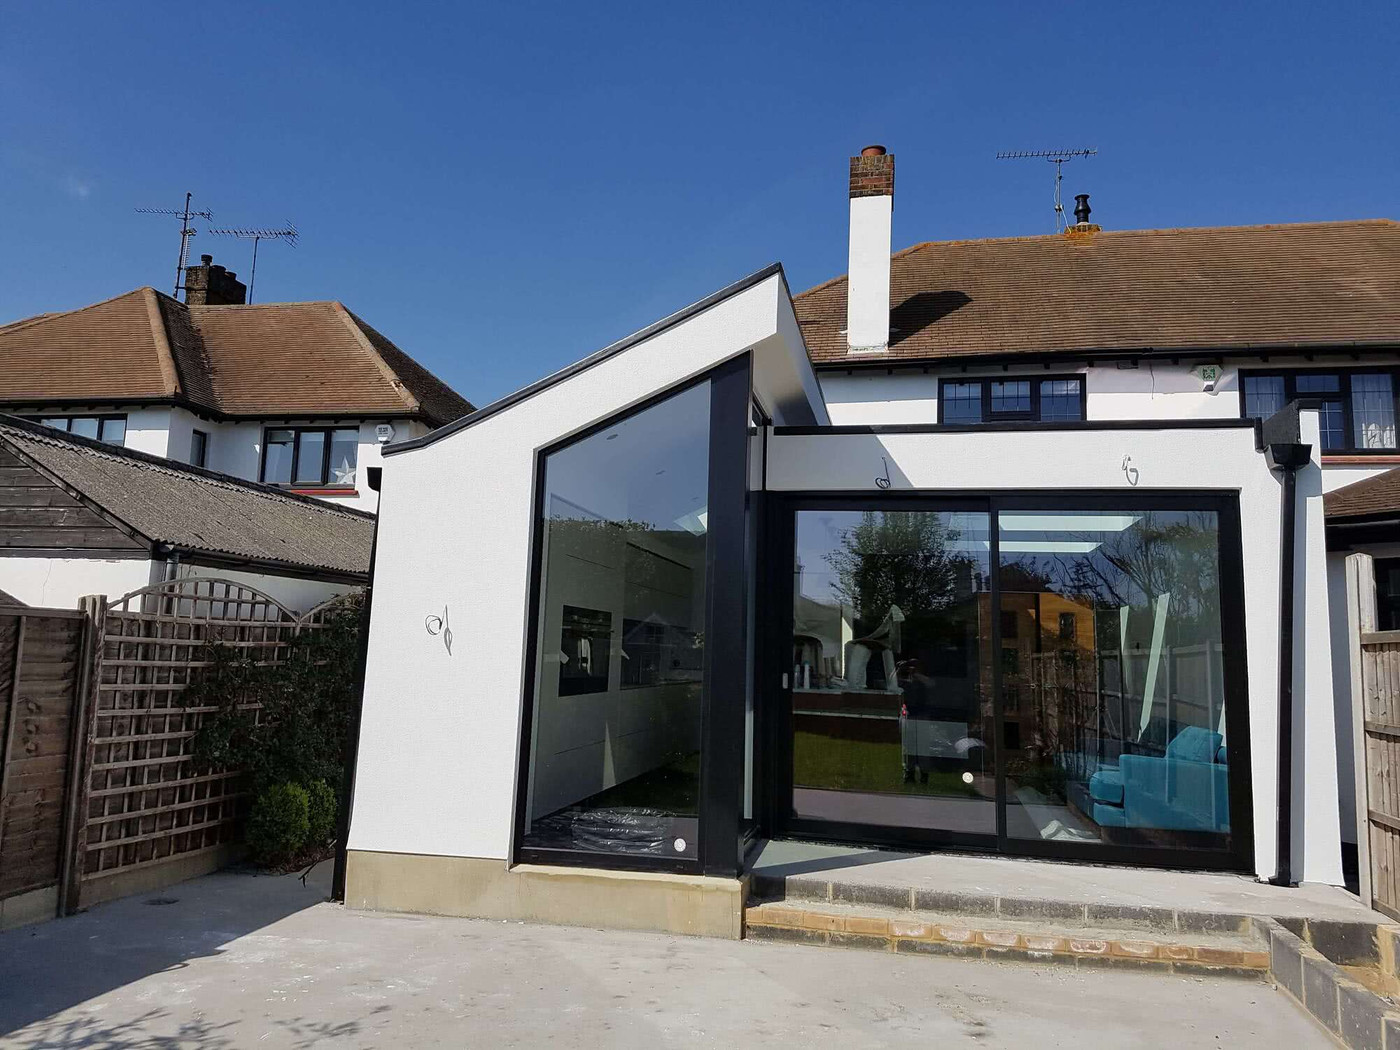 Example of a domestic rendering project completed by R. Fulcher & Sons